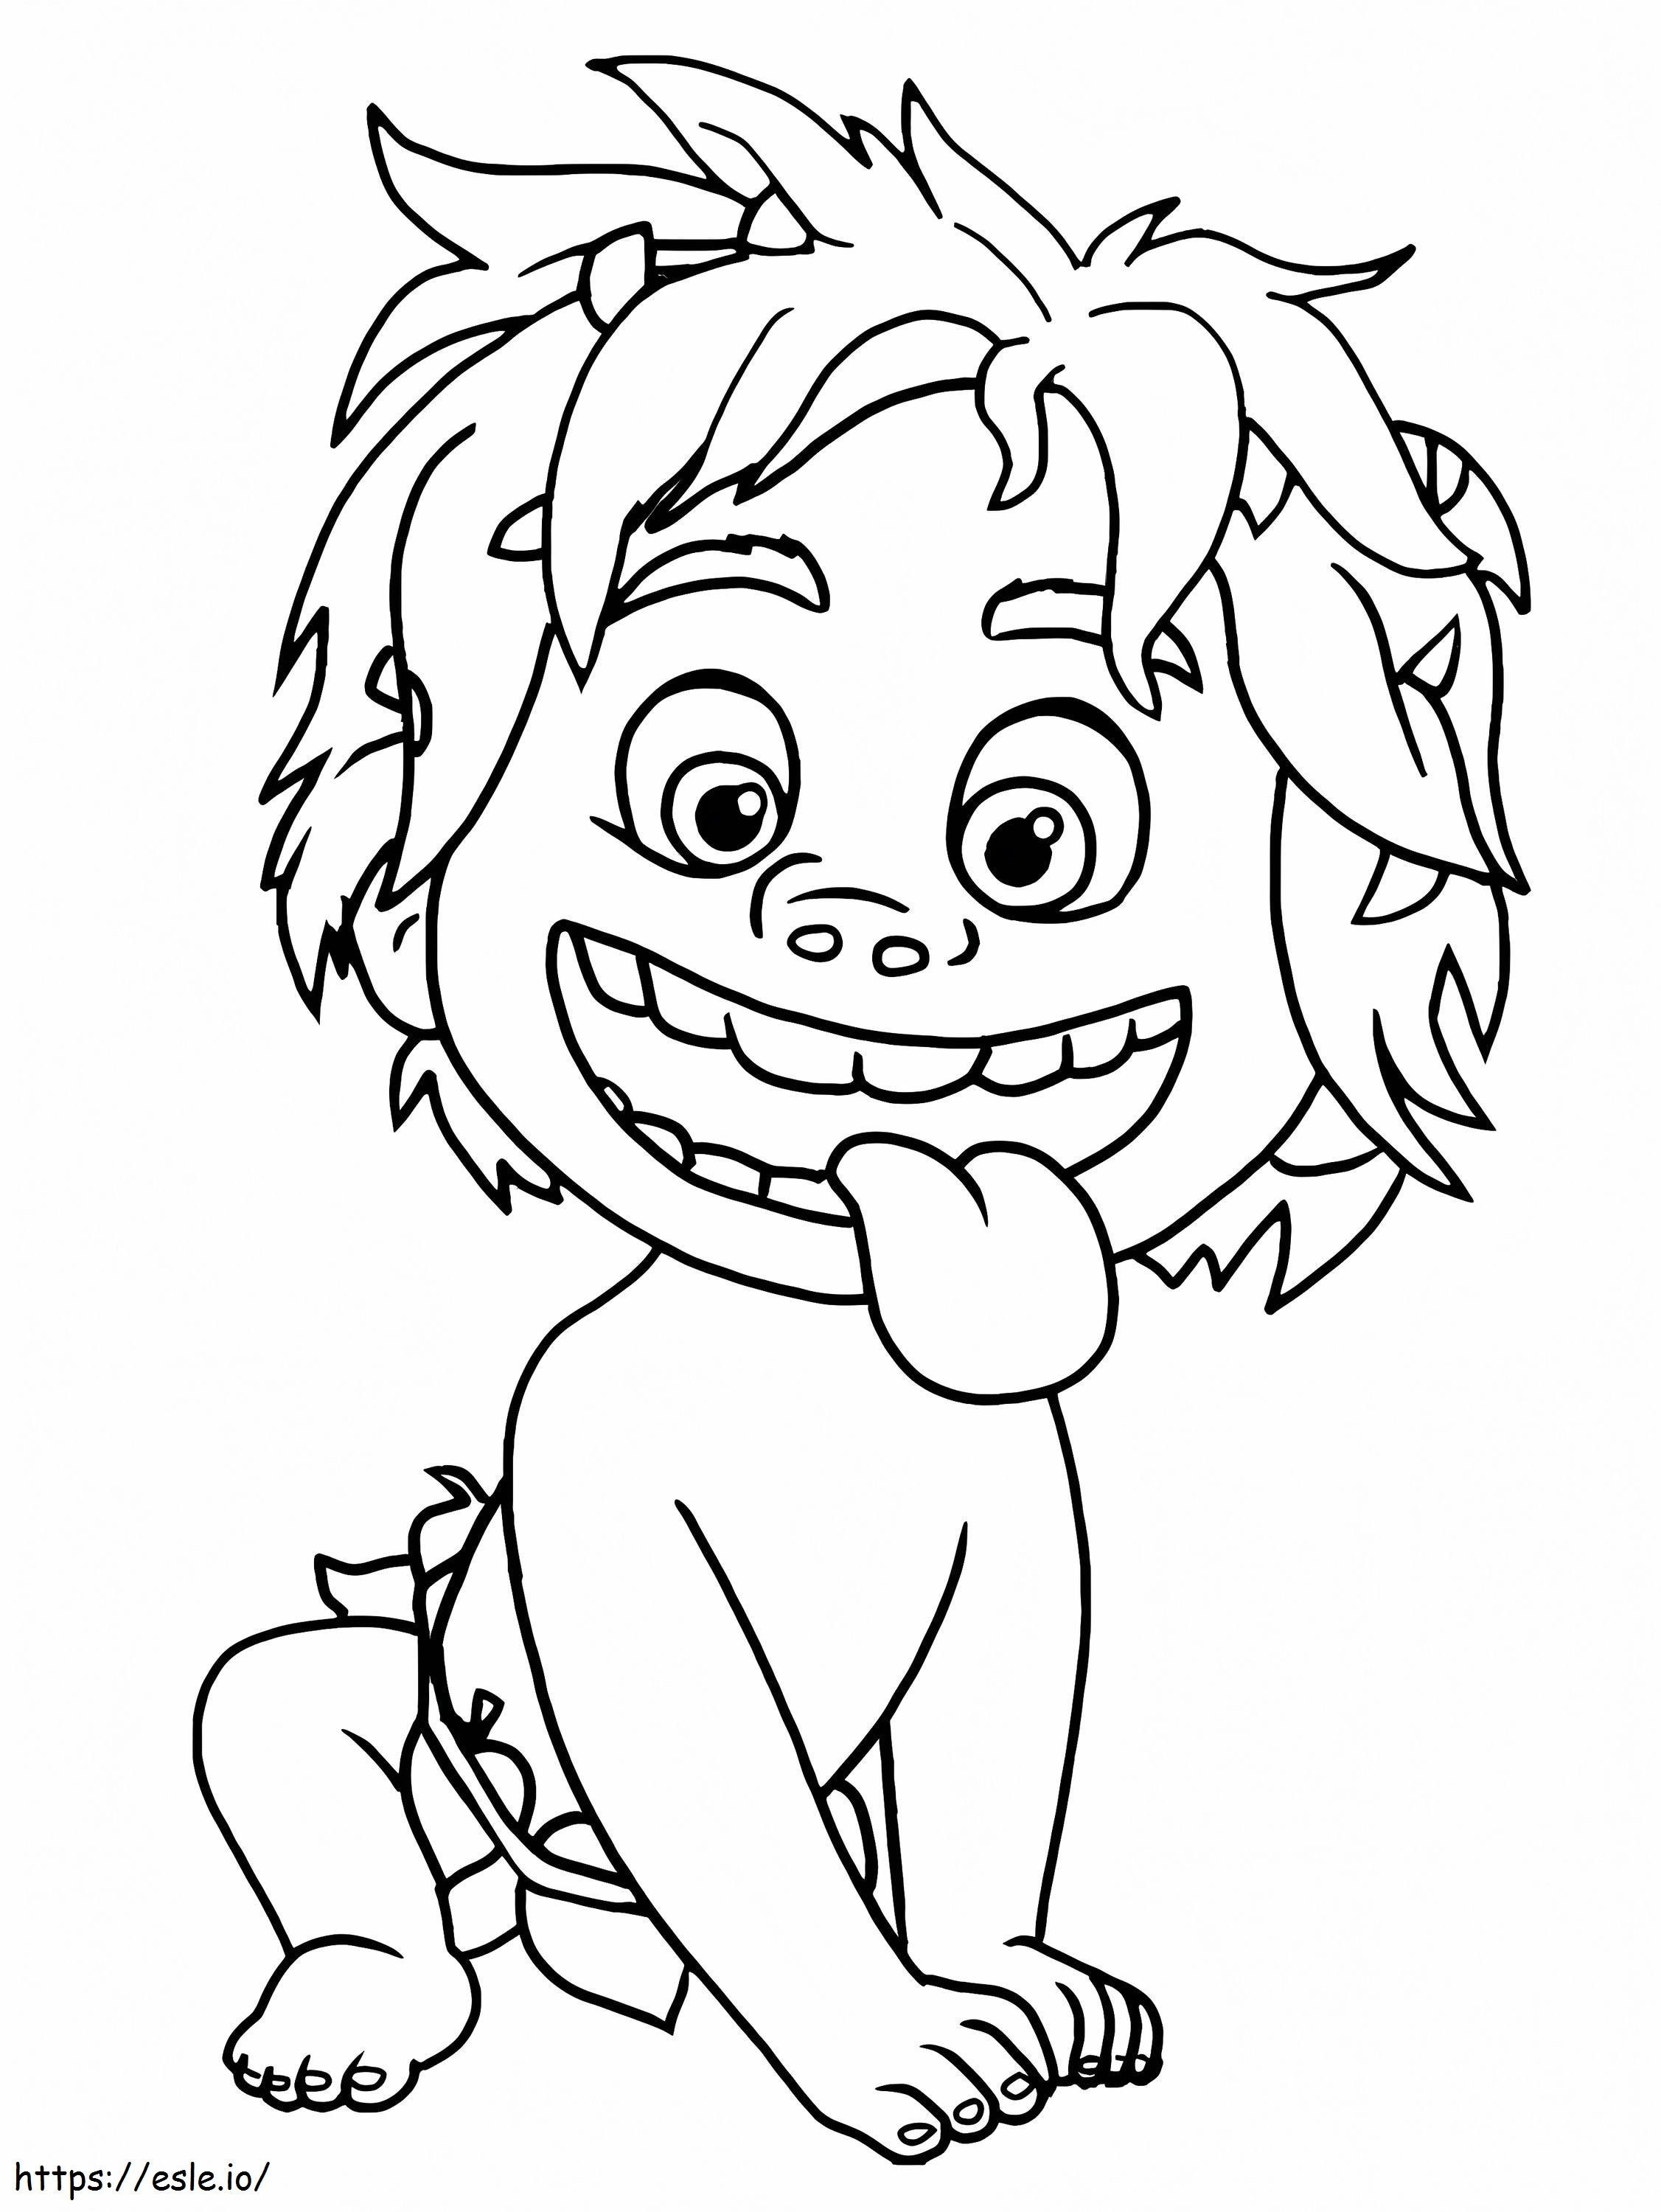 Fun Place coloring page